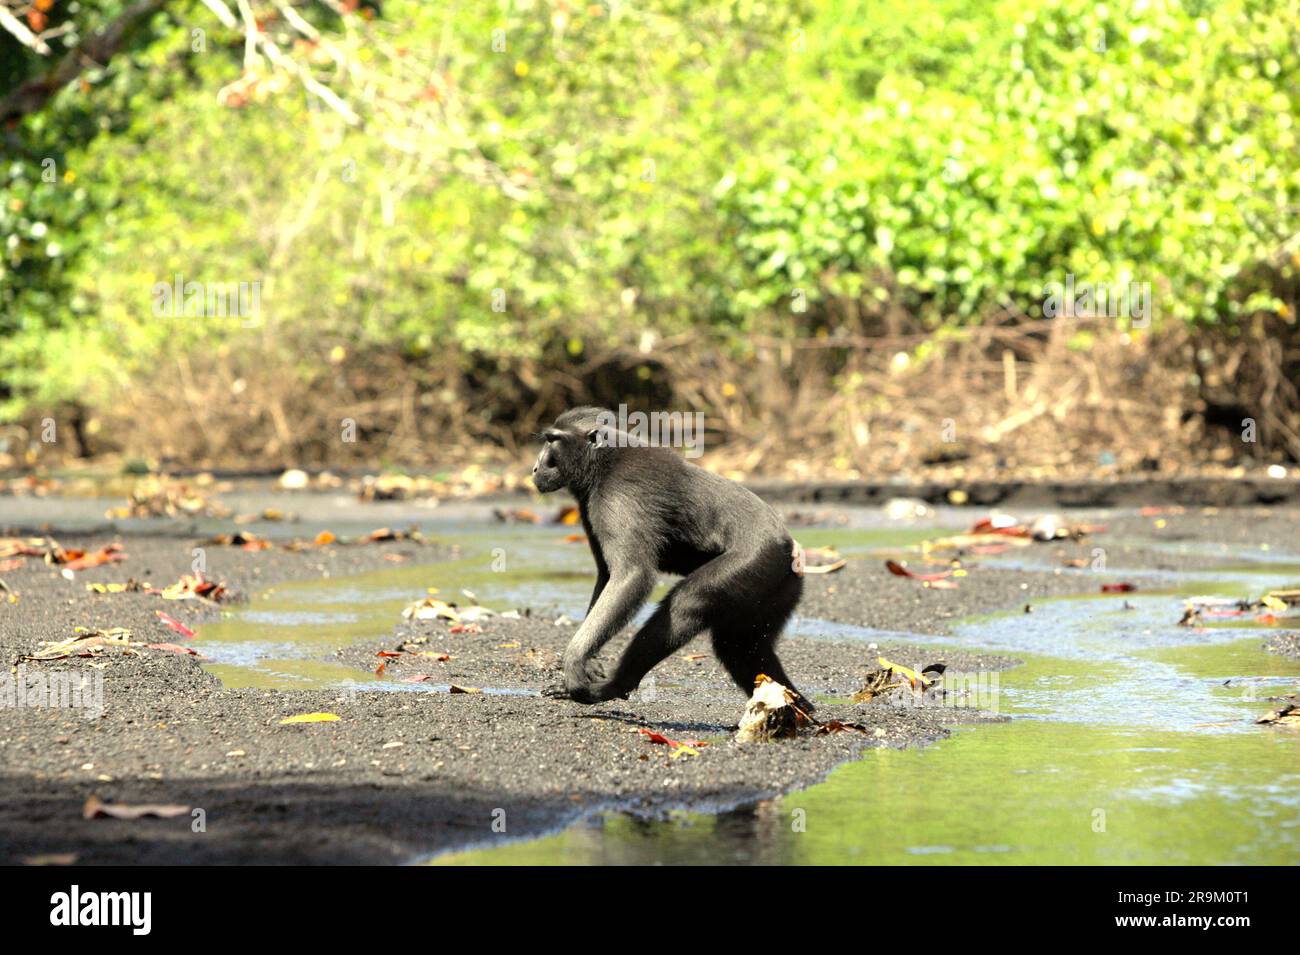 A Sulawesi black crested macaque (Macaca nigra) walks bipedally as it is foraging on a stream near a beach in Tangkoko forest, North Sulawesi, Indonesia. Climate change may gradually change behaviours and reproductive cycle of this threatened species, while at the same time reduce their habitat suitability, that could force them to move out of safe habitats and face potential conflicts with human, scientists say. Without the warming temperature, primates have already suffered from the escalating anthropogenic pressures, causing them to have declining population and extinction risk. Stock Photo